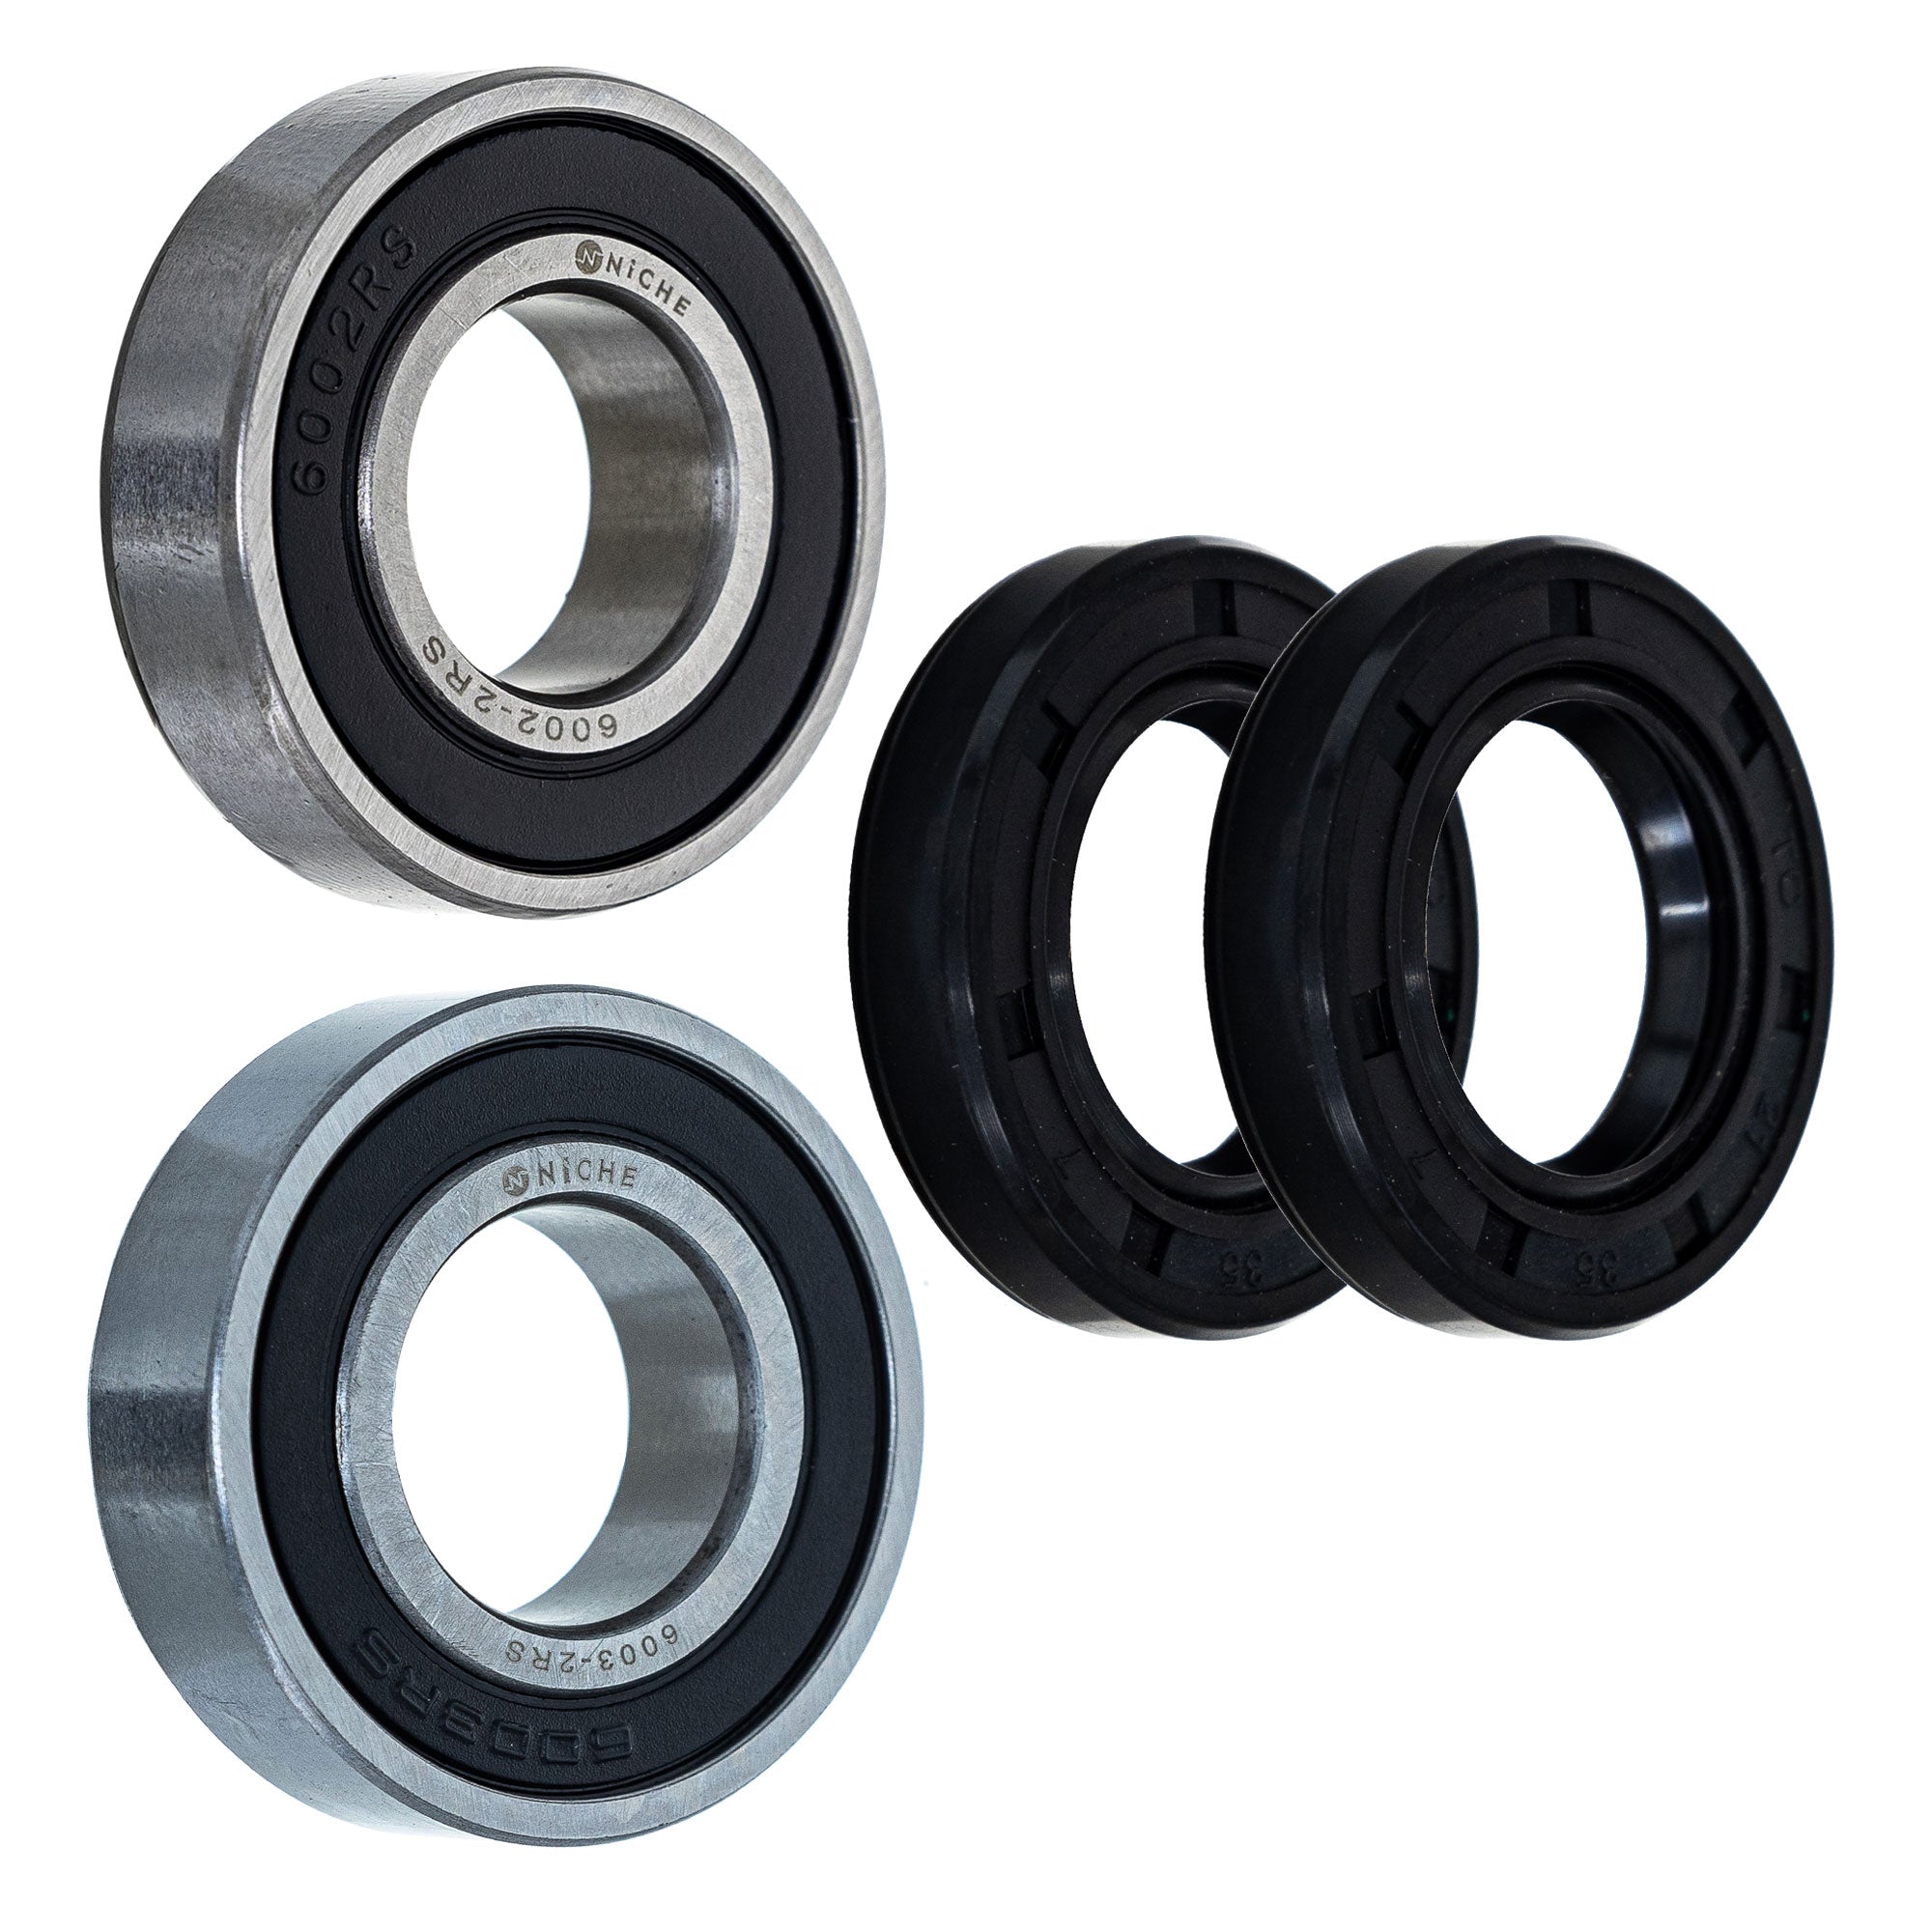 Wheel Bearing Seal Kit for zOTHER FourTrax NICHE MK1008947